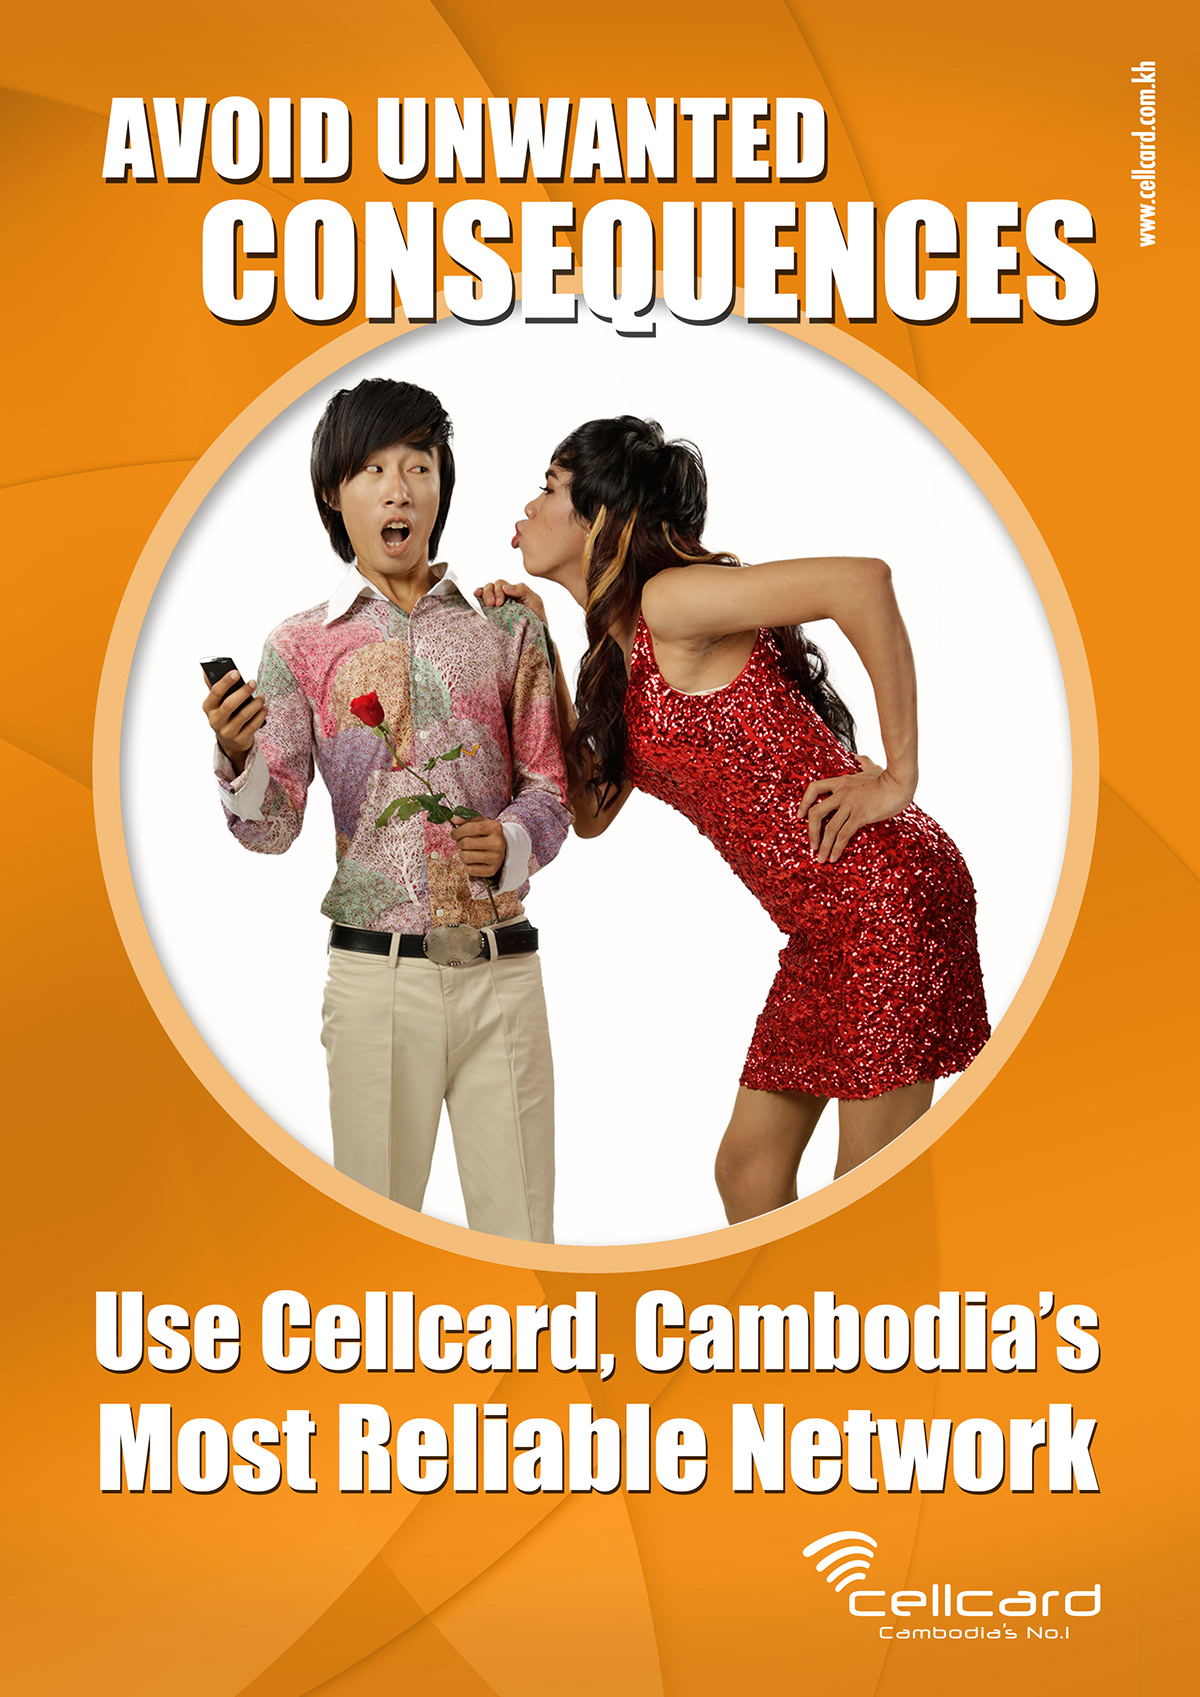 Cellcard Print Ad avoid unwanted consequence